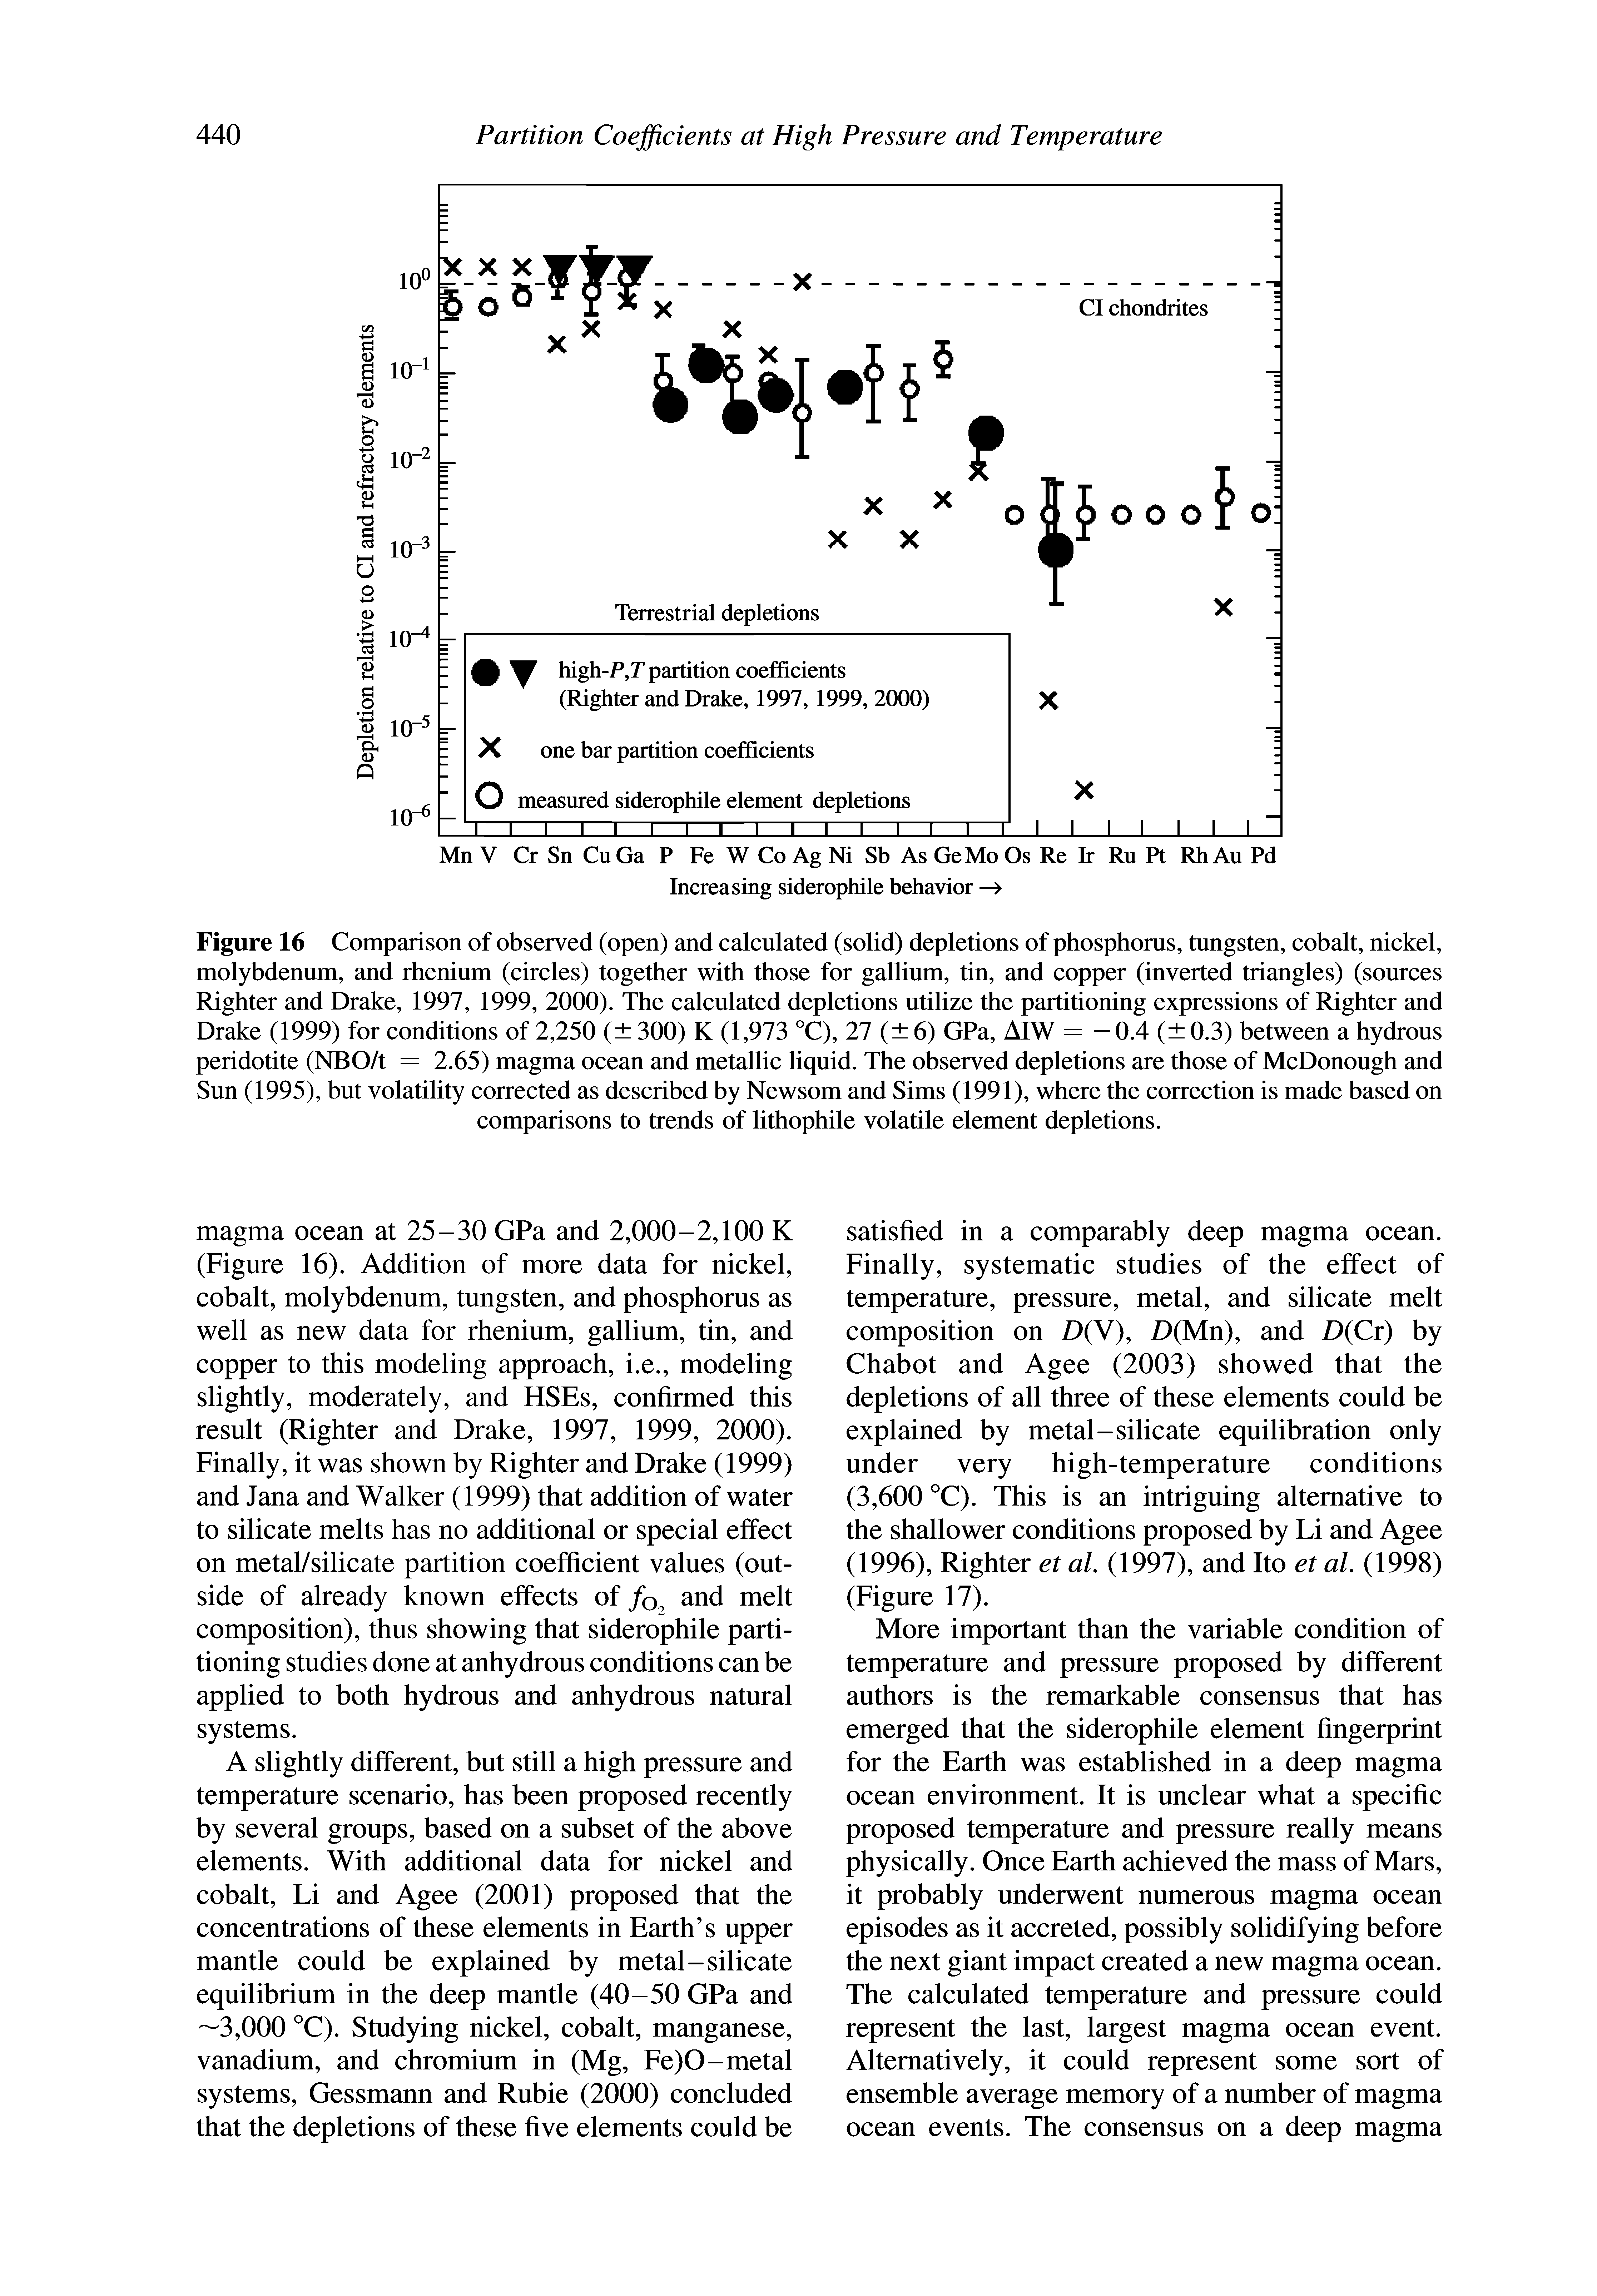 Figure 16 Comparison of observed (open) and calculated (solid) depletions of phosphorus, tungsten, cobalt, nickel, molybdenum, and rhenium (circles) together with those for gallium, tin, and copper (inverted triangles) (sources Righter and Drake, 1997, 1999, 2000). The calculated depletions utilize the partitioning expressions of Righter and Drake (1999) for conditions of 2,250 ( 300) K (1,973 °C), 27 ( 6) GPa, AIW = — 0.4 ( 0.3) between a hydrous peridotite (NBO/t = 2.65) magma ocean and metallic liquid. The observed depletions are those of McDonough and Sun (1995), but volatility corrected as described by Newsom and Sims (1991), where the correction is made based on comparisons to trends of lithophile volatile element depletions.